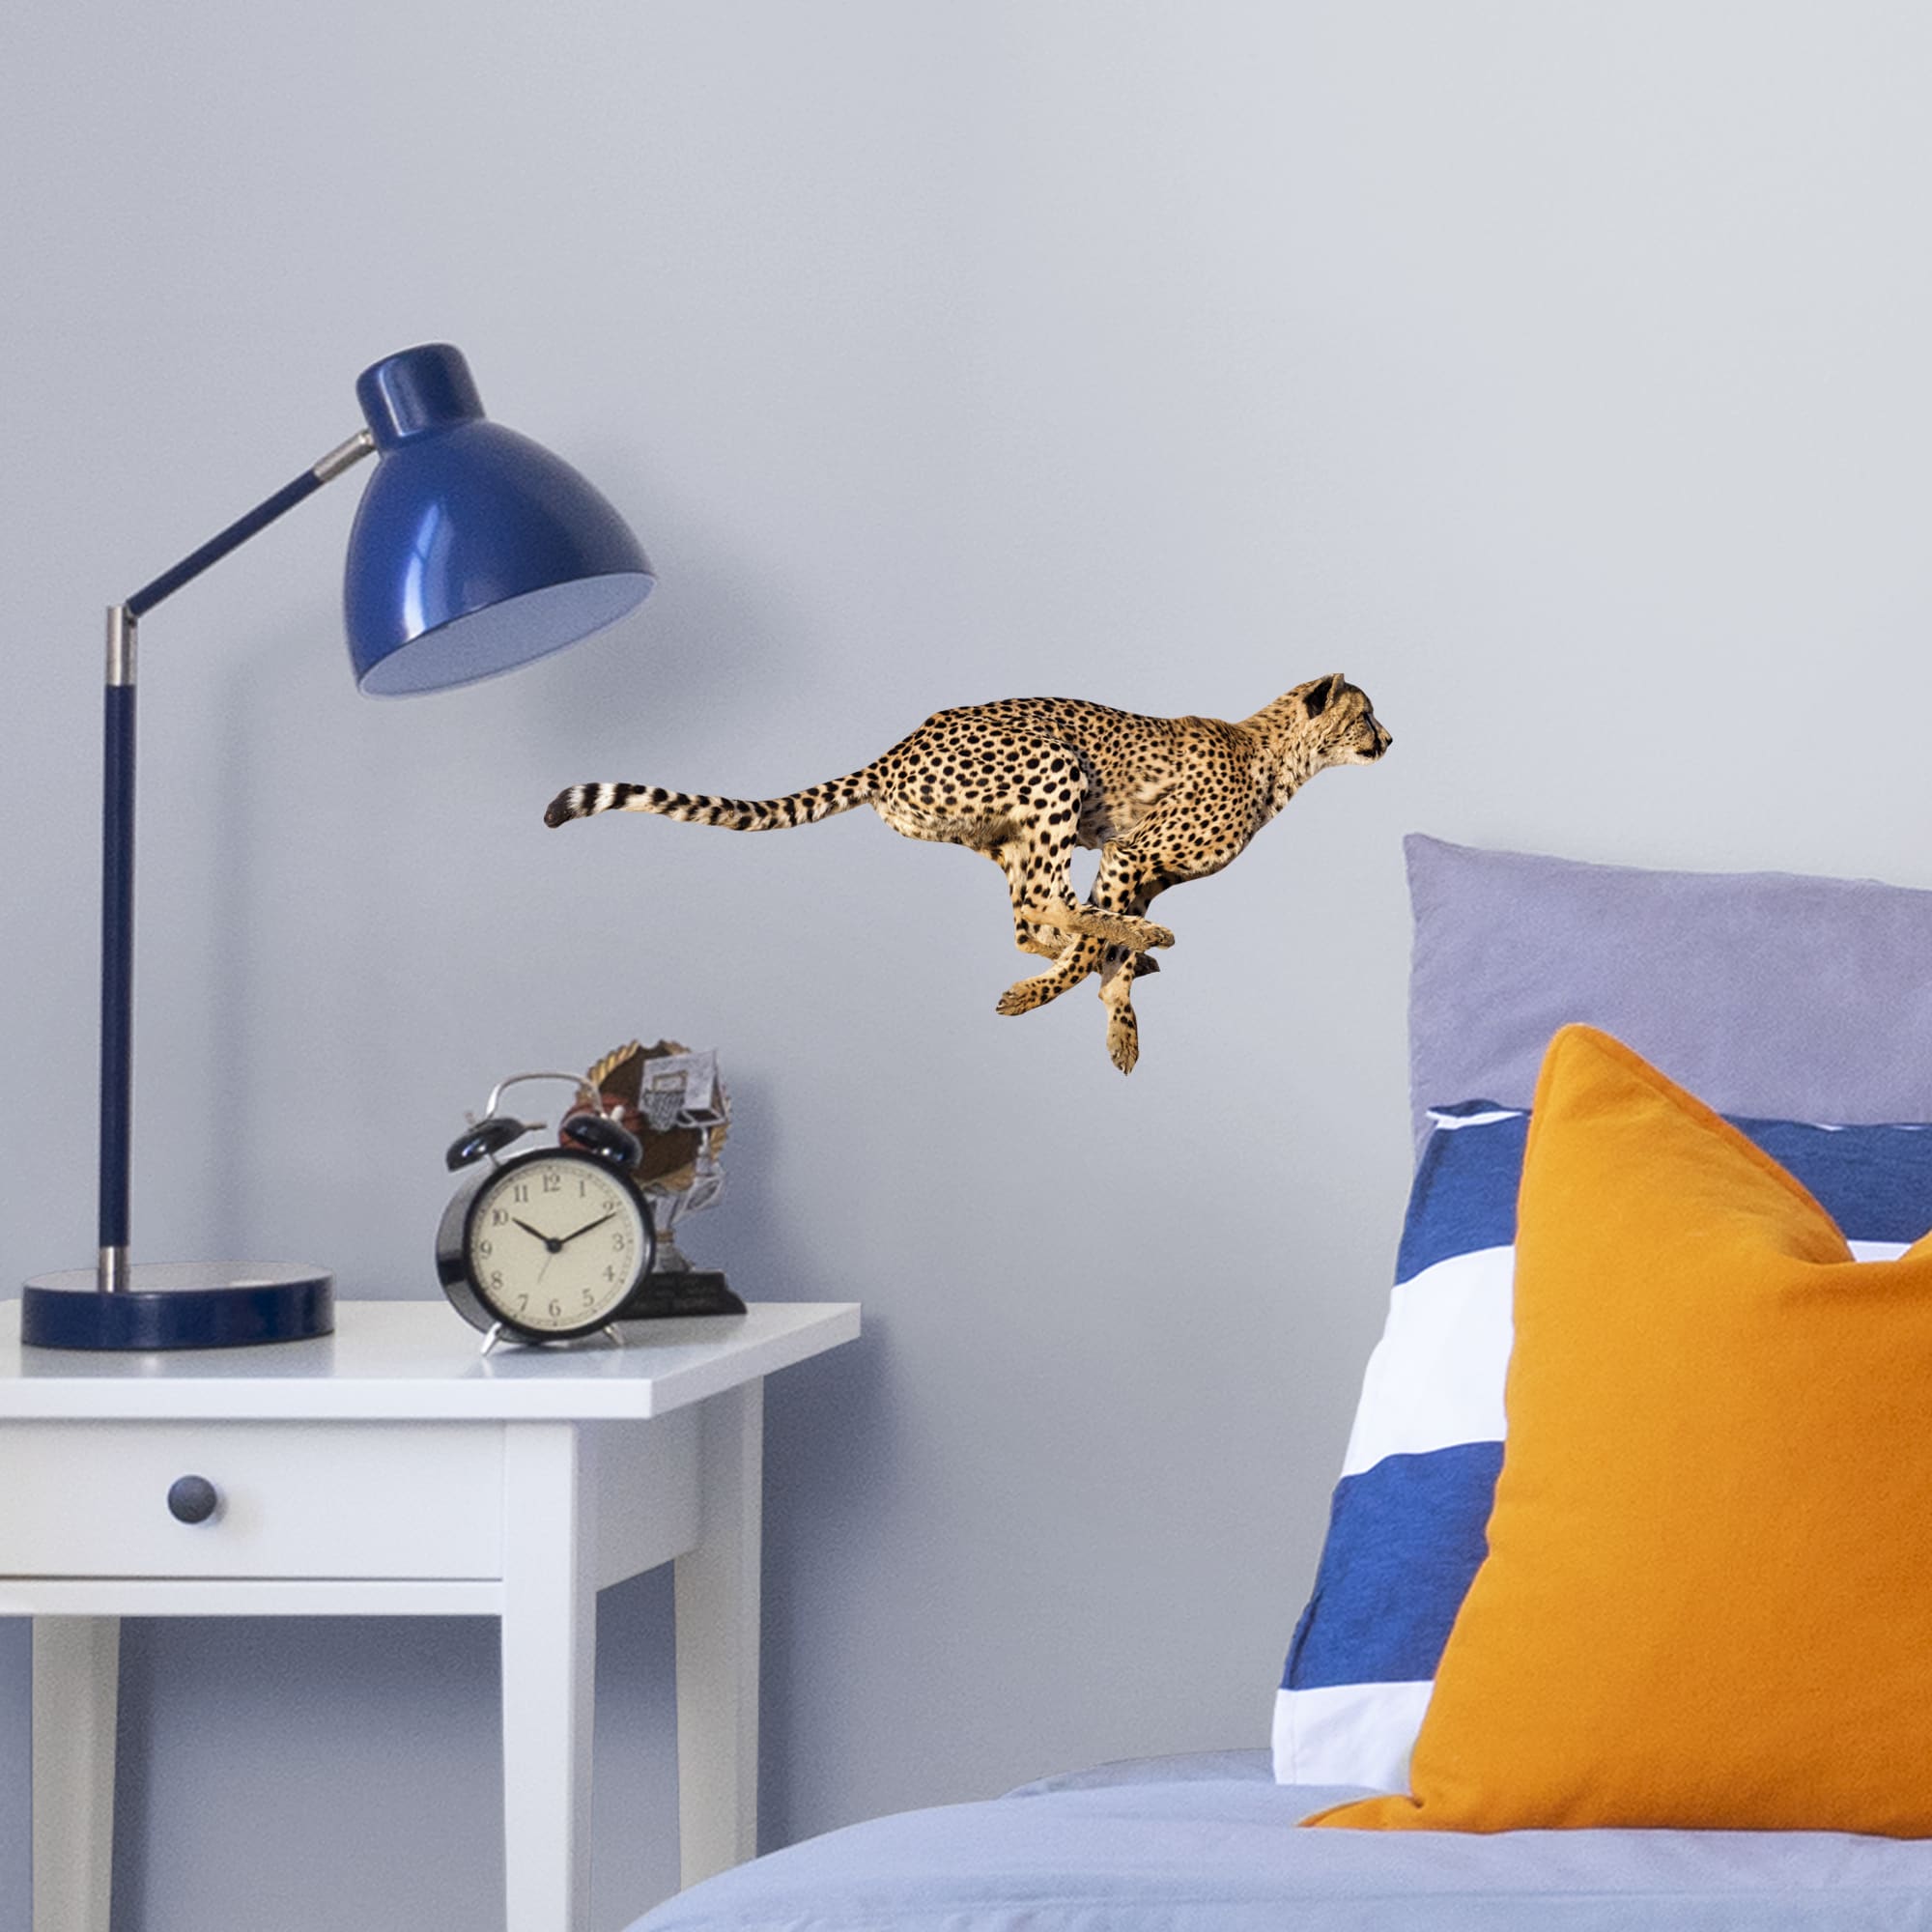 Cheetah - Removable Vinyl Decal Large by Fathead